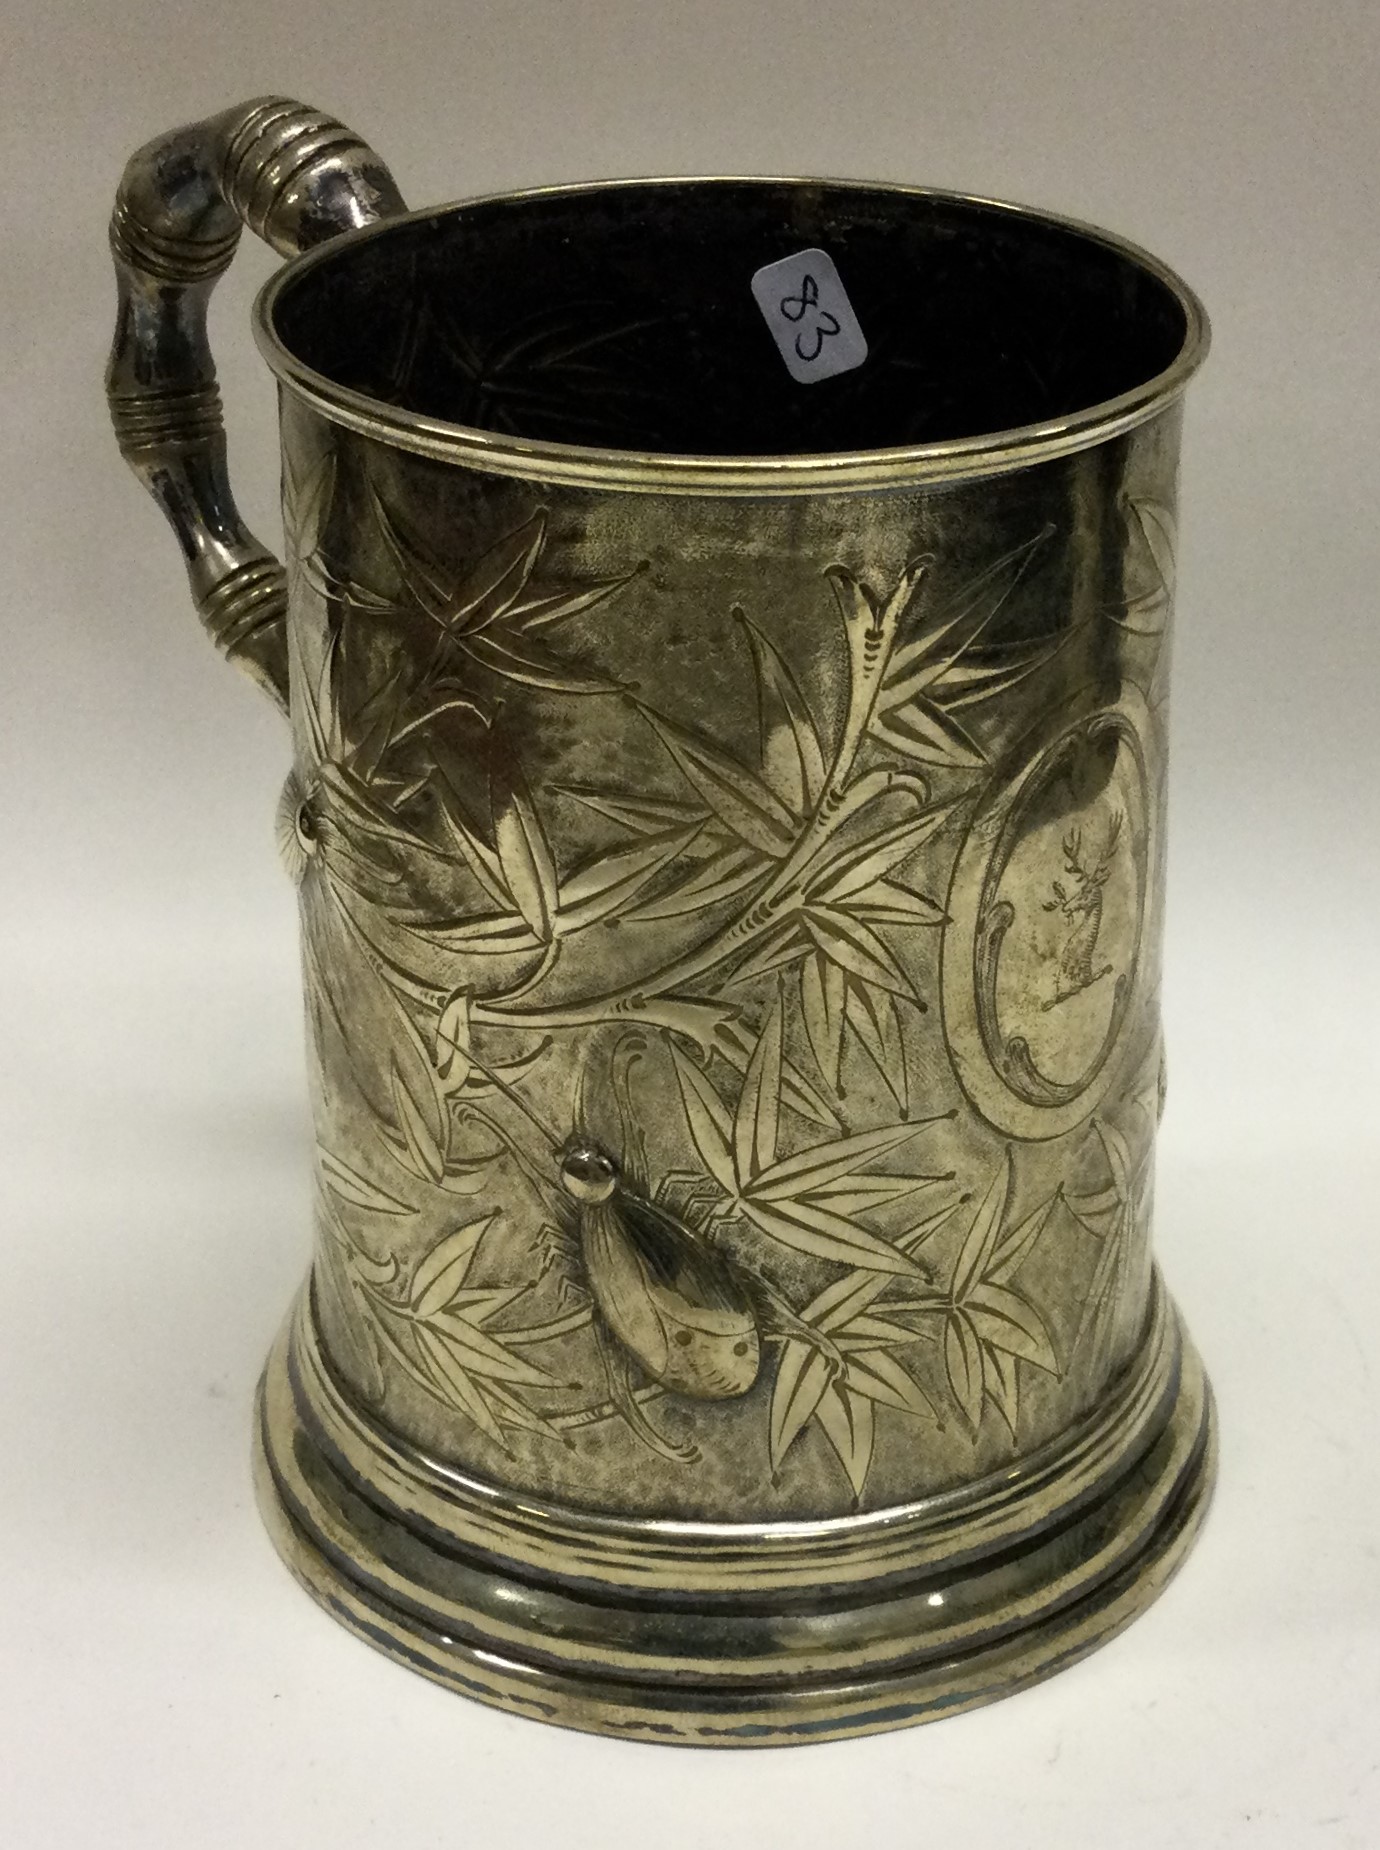 A heavy Chinese silver plated mug embossed with beetles.